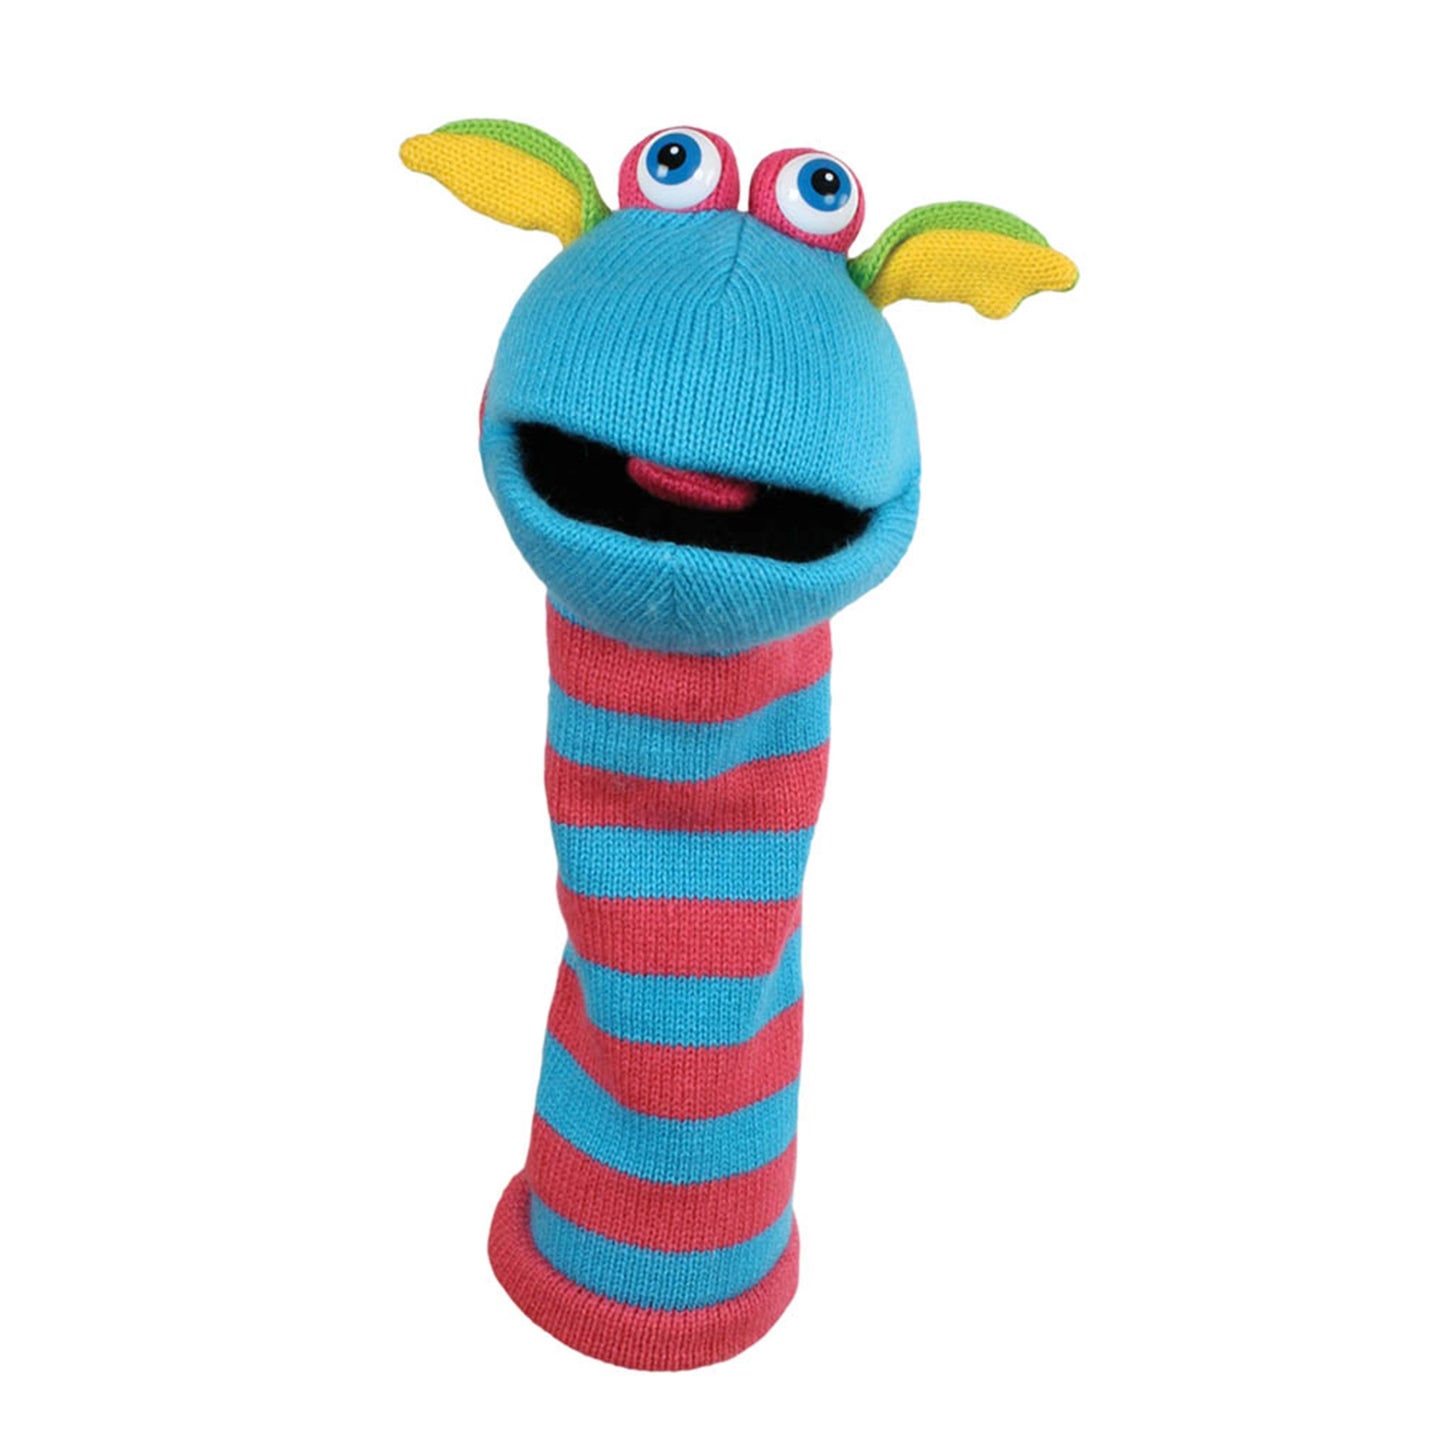 Sockette Hand Puppet - Scorch - The Puppet Company - The Forgotten Toy Shop